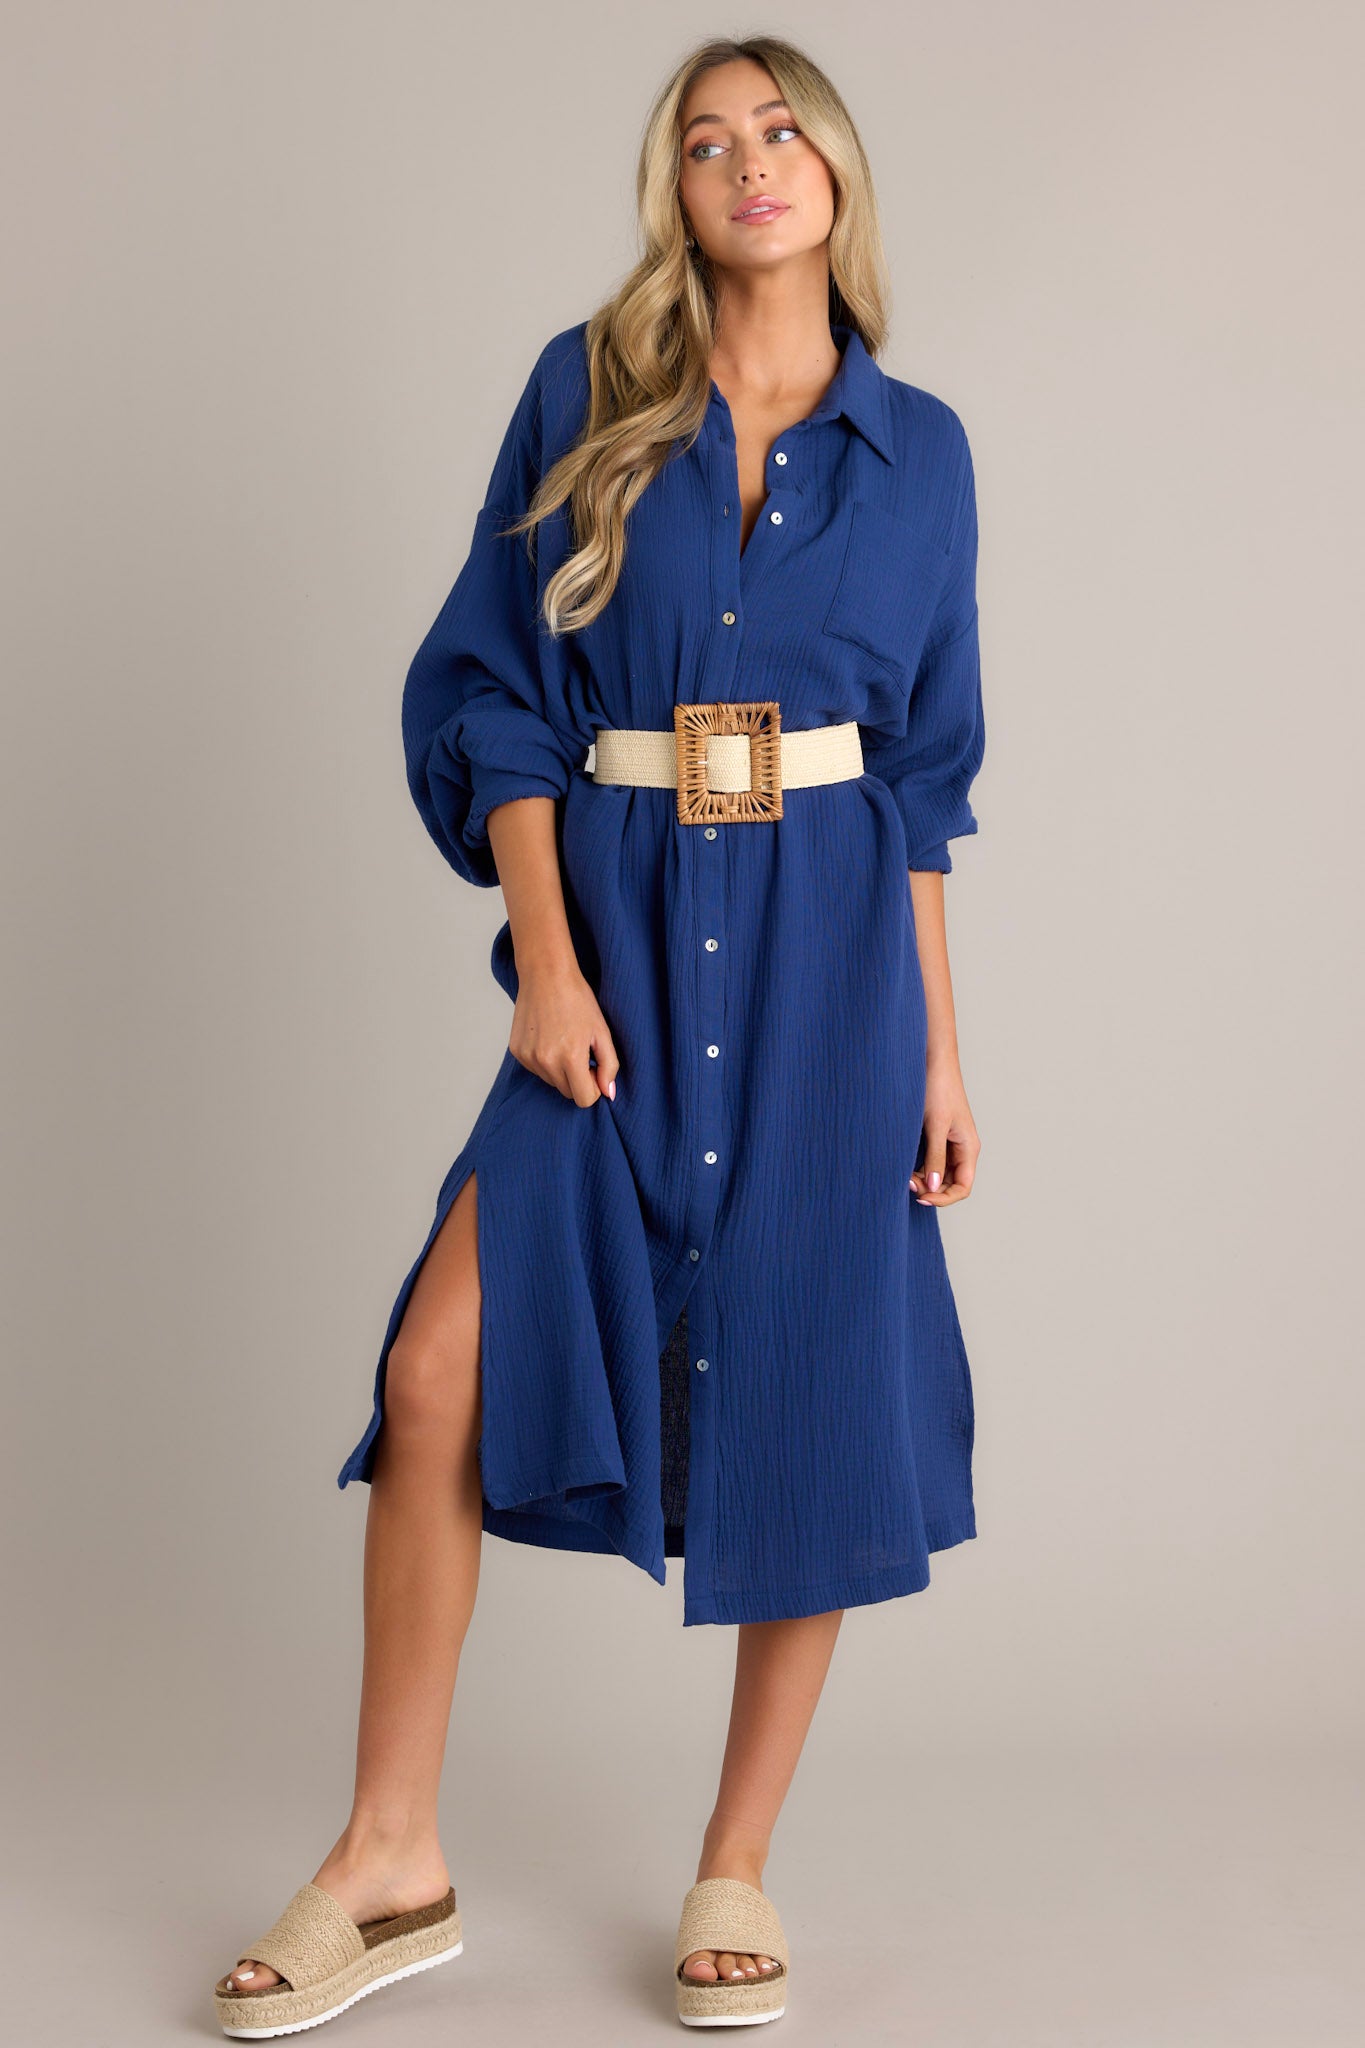 Full body view of this Navy Gauze Midi Dress featuring a collared neckline, functional buttons down the front, a front pocket on the left side of the bust, long sleeves with a cuff secured by a functional button, and two slits up the bottom hemline ending just below the knee.